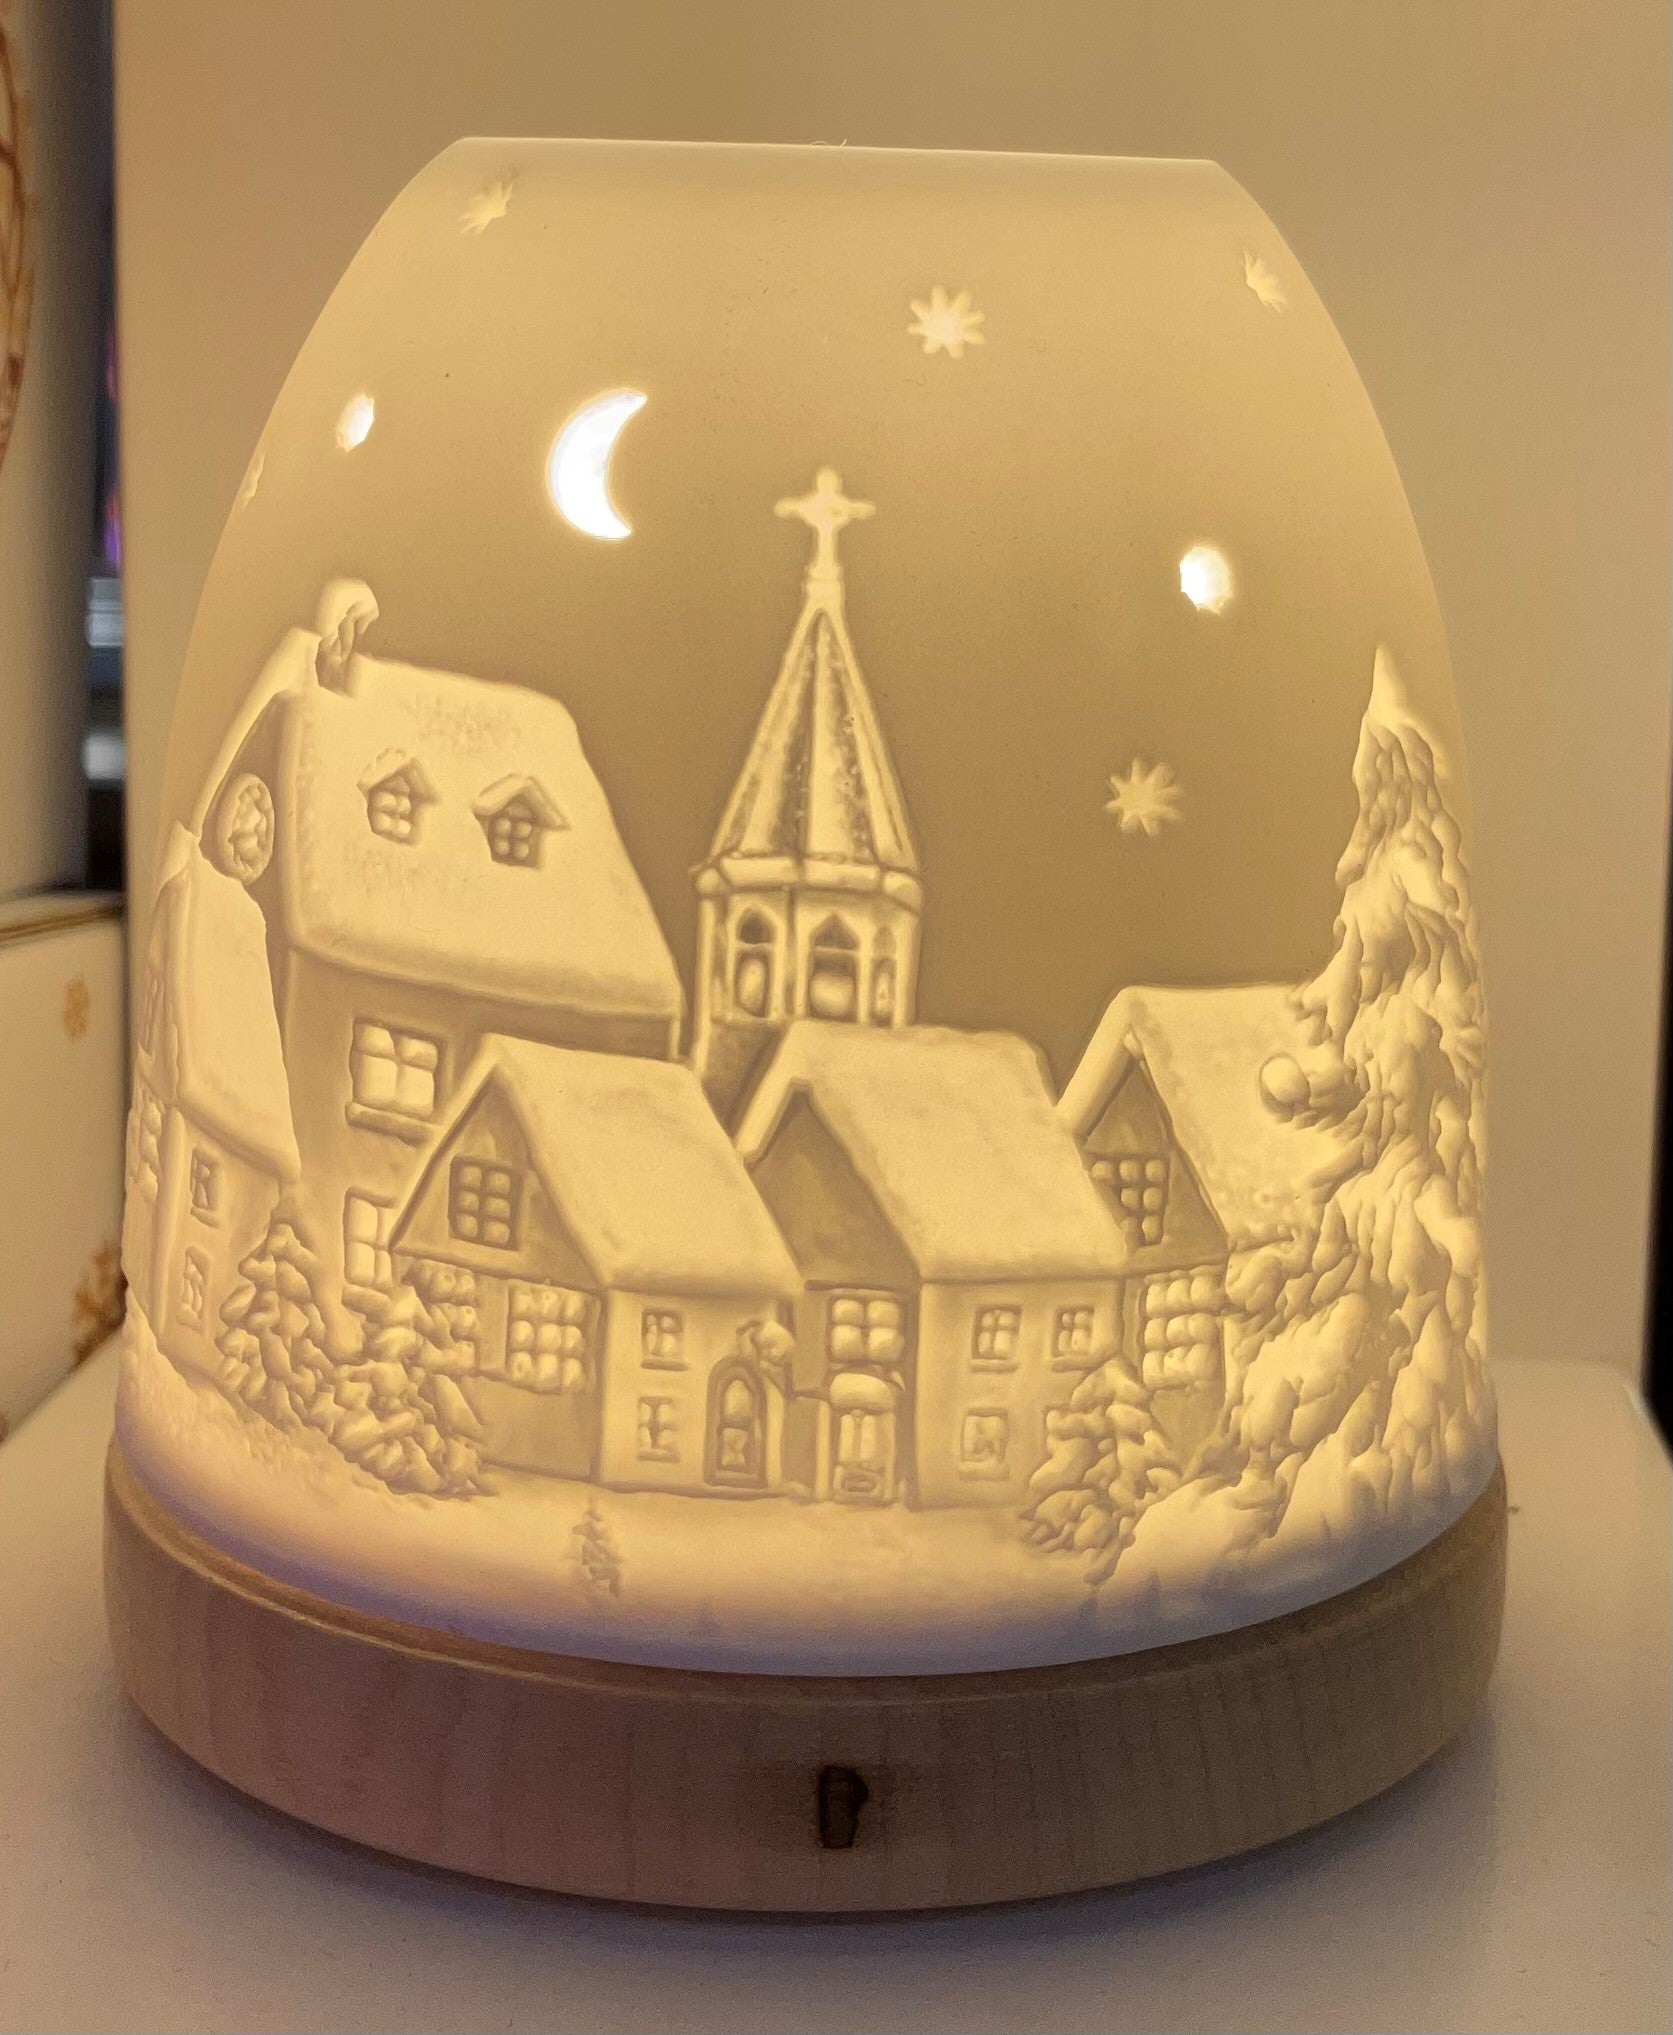 Christmas Village Ceramic Tea Light Dome Candle Igloo with wooden base